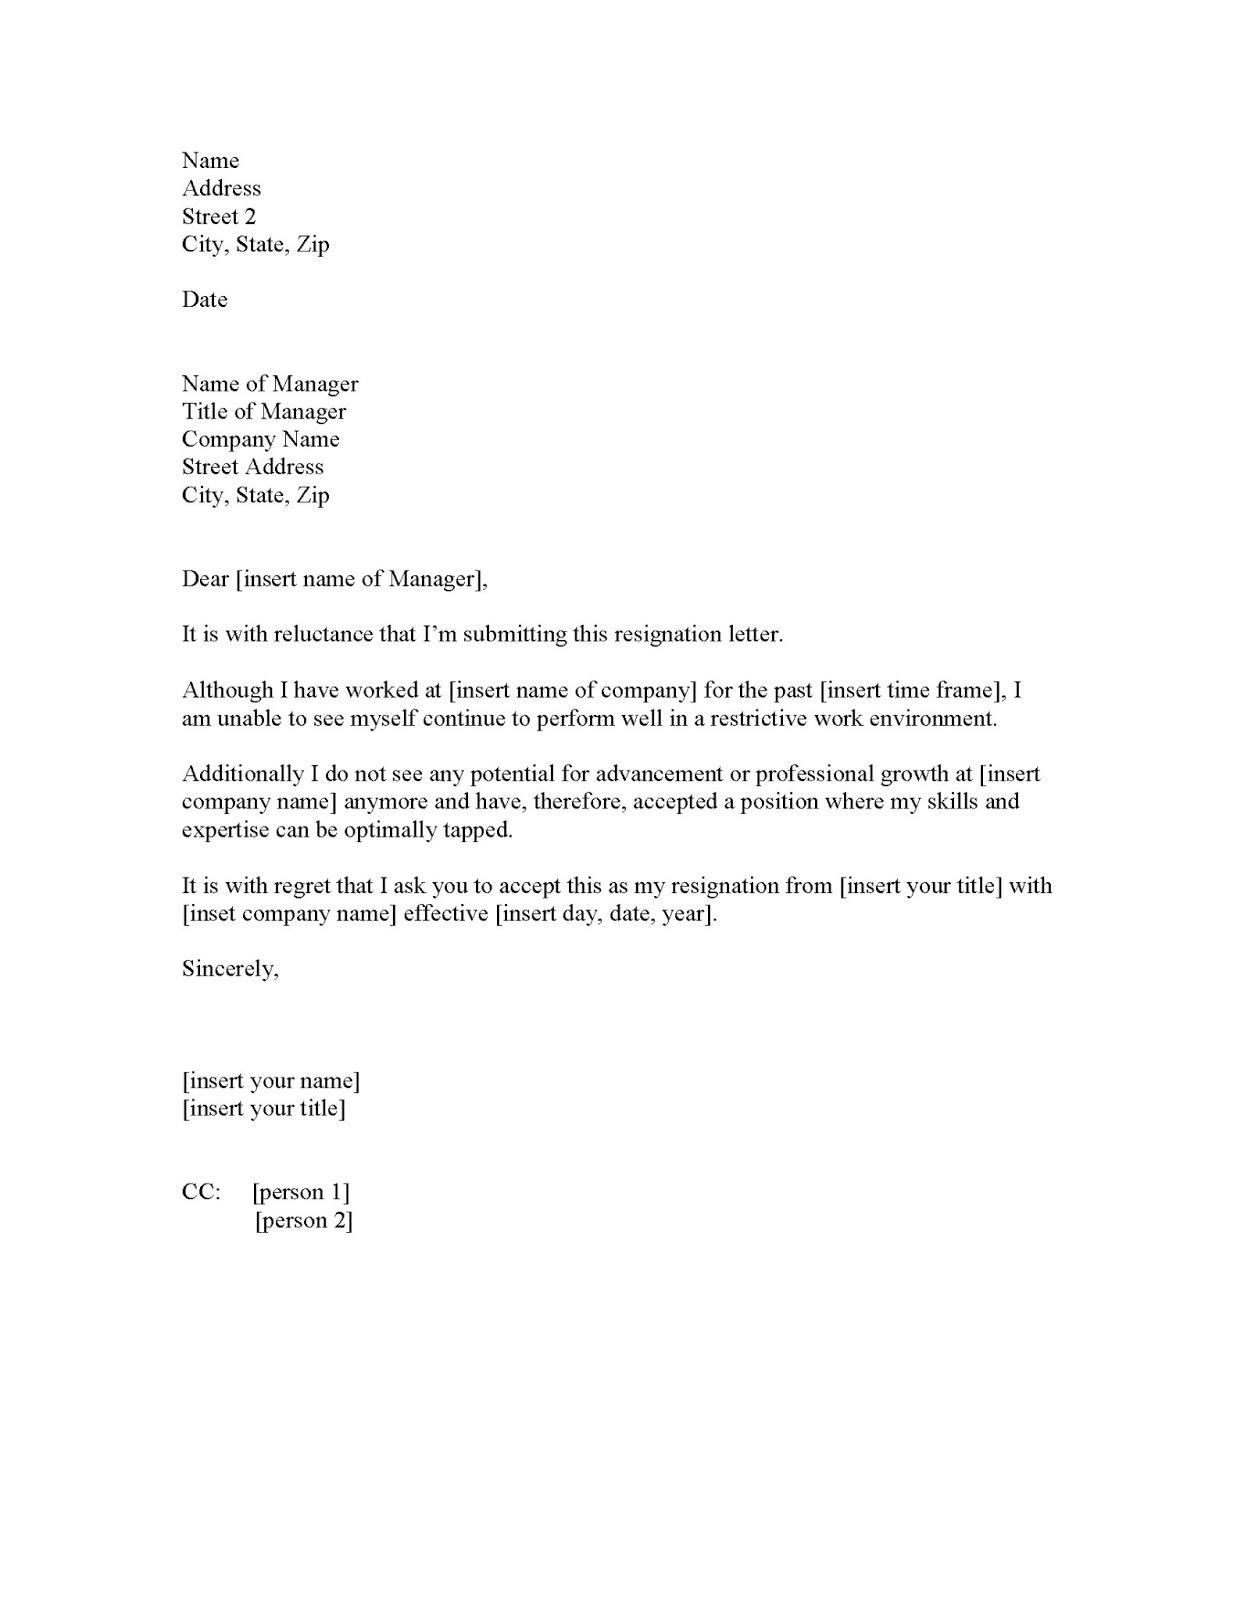 How to Write a Resignation Letter Rich image